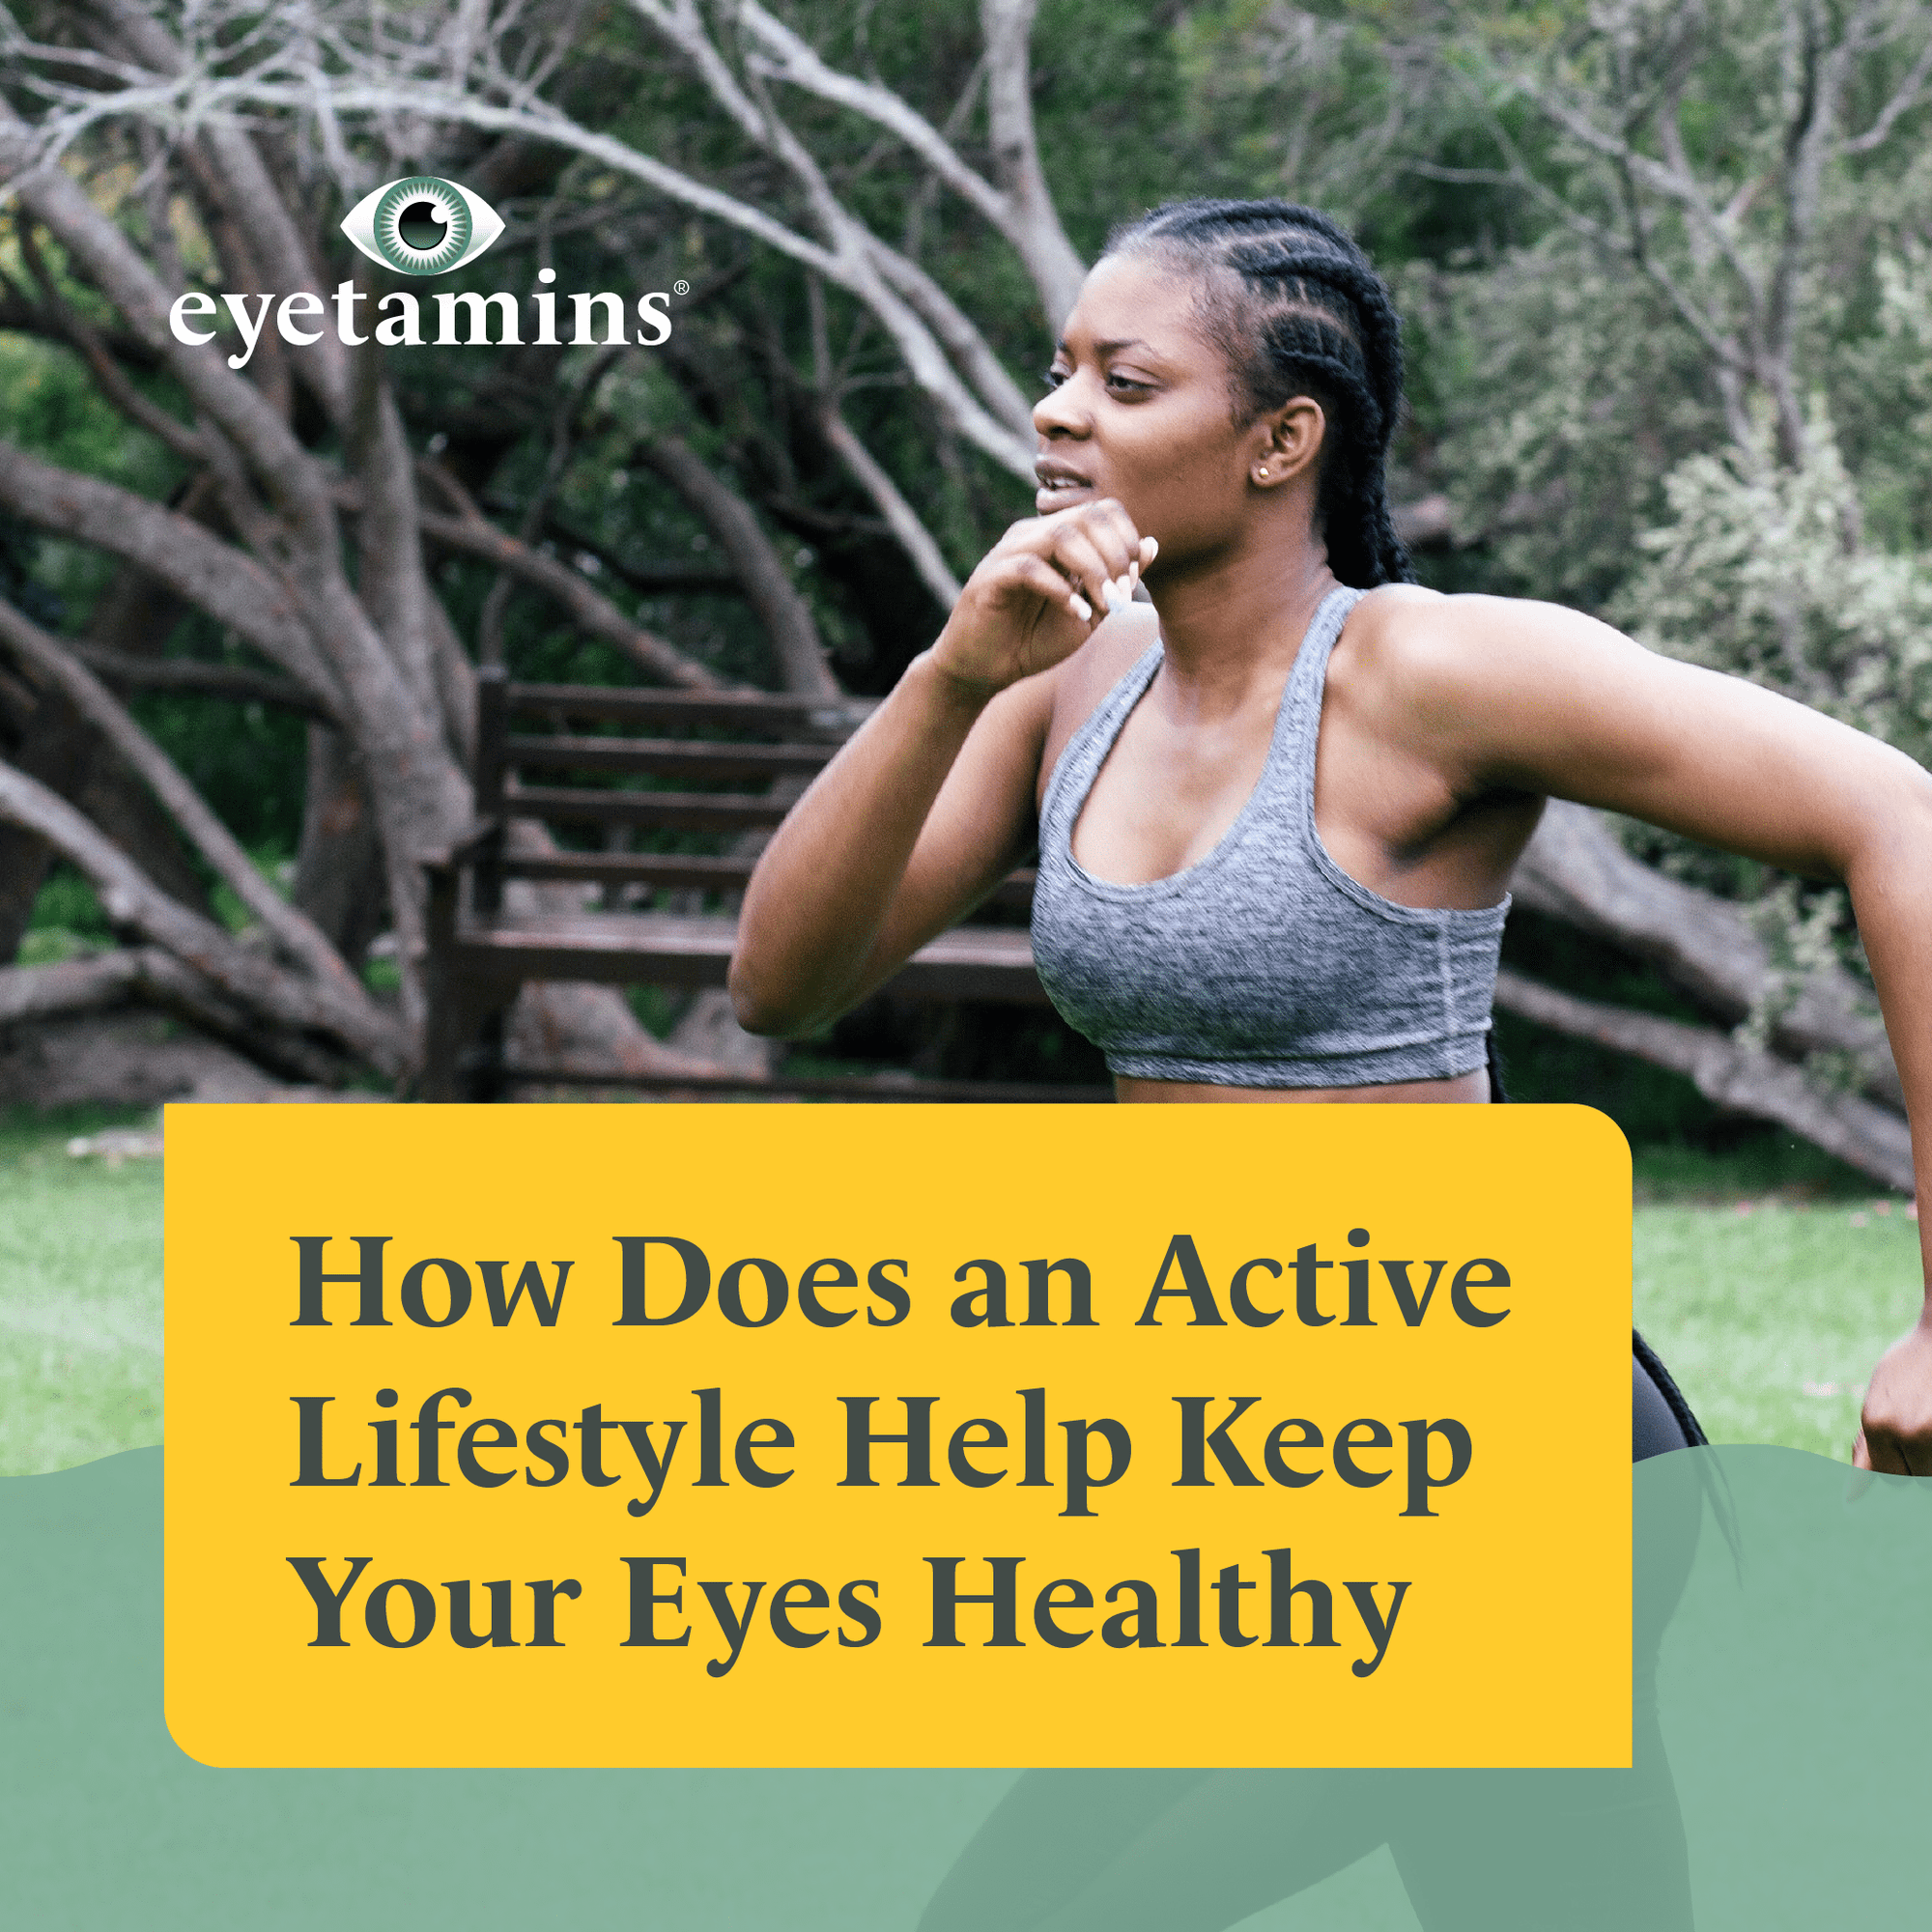 Eyetamins - How Does an Active Lifestyle Help Keep Your Eyes Healthy